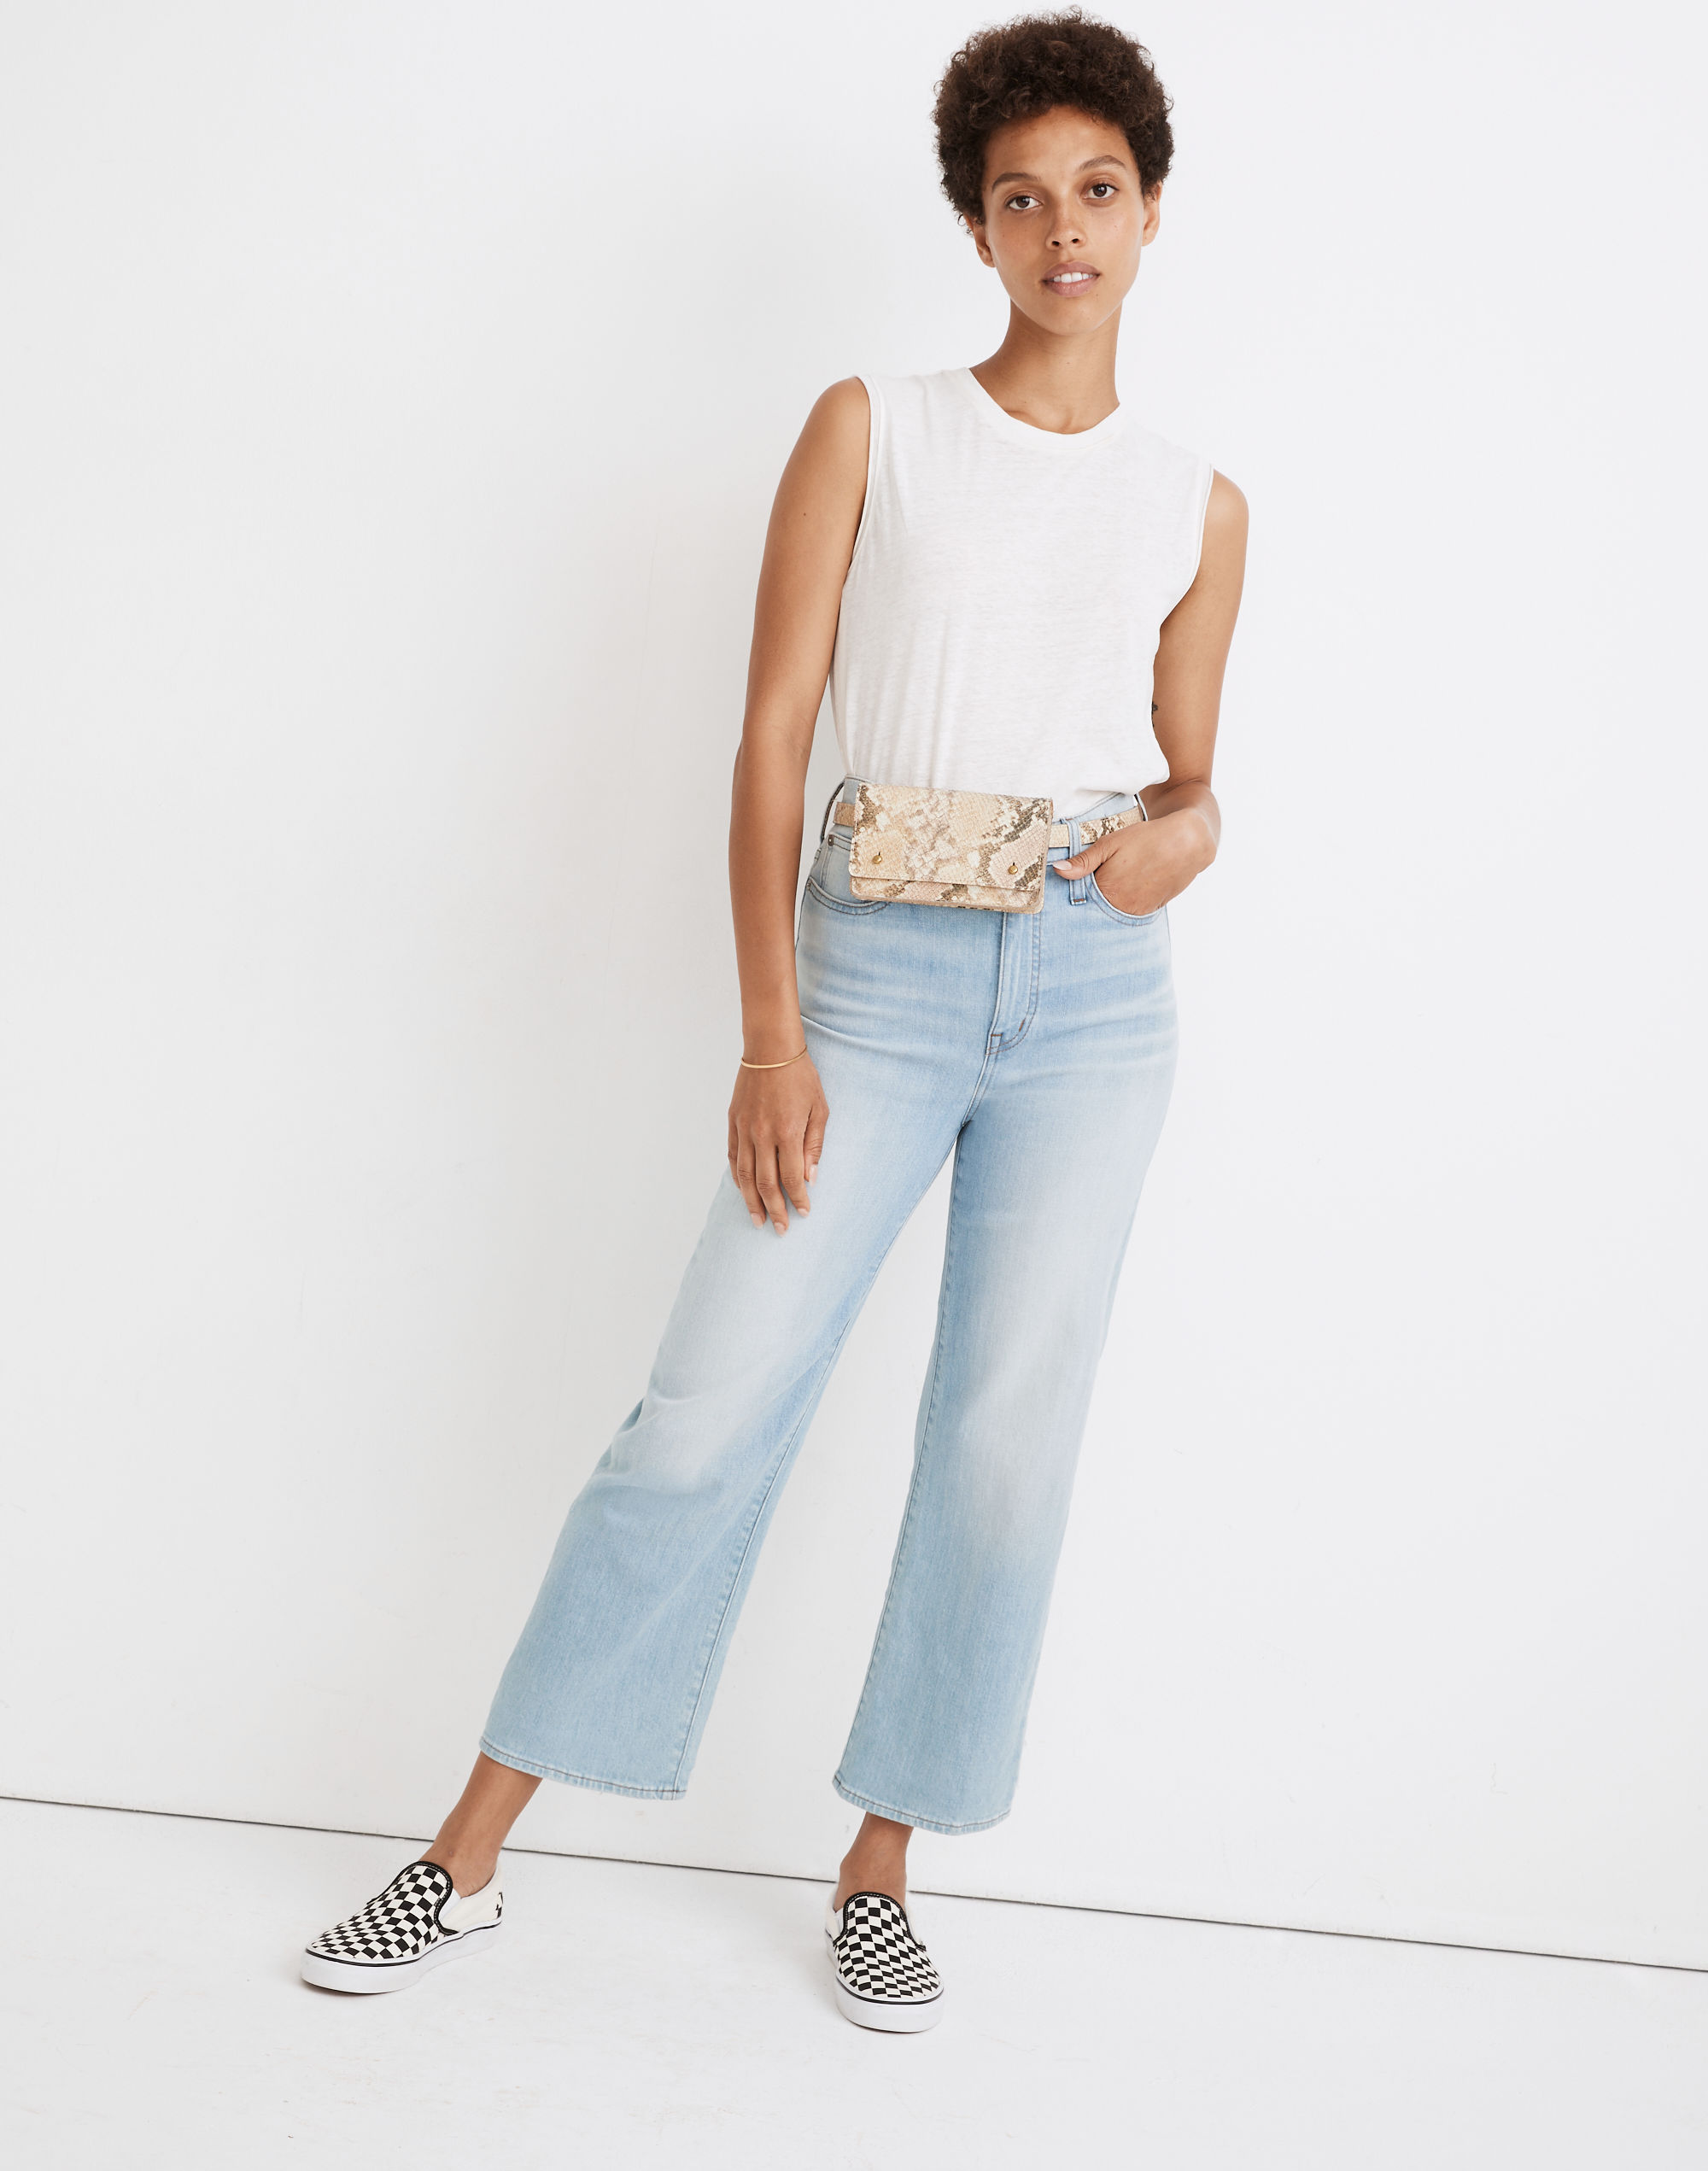 Madewell + Plus Relaxed Denim Shorts in Homecrest Wash: Ripped Edition